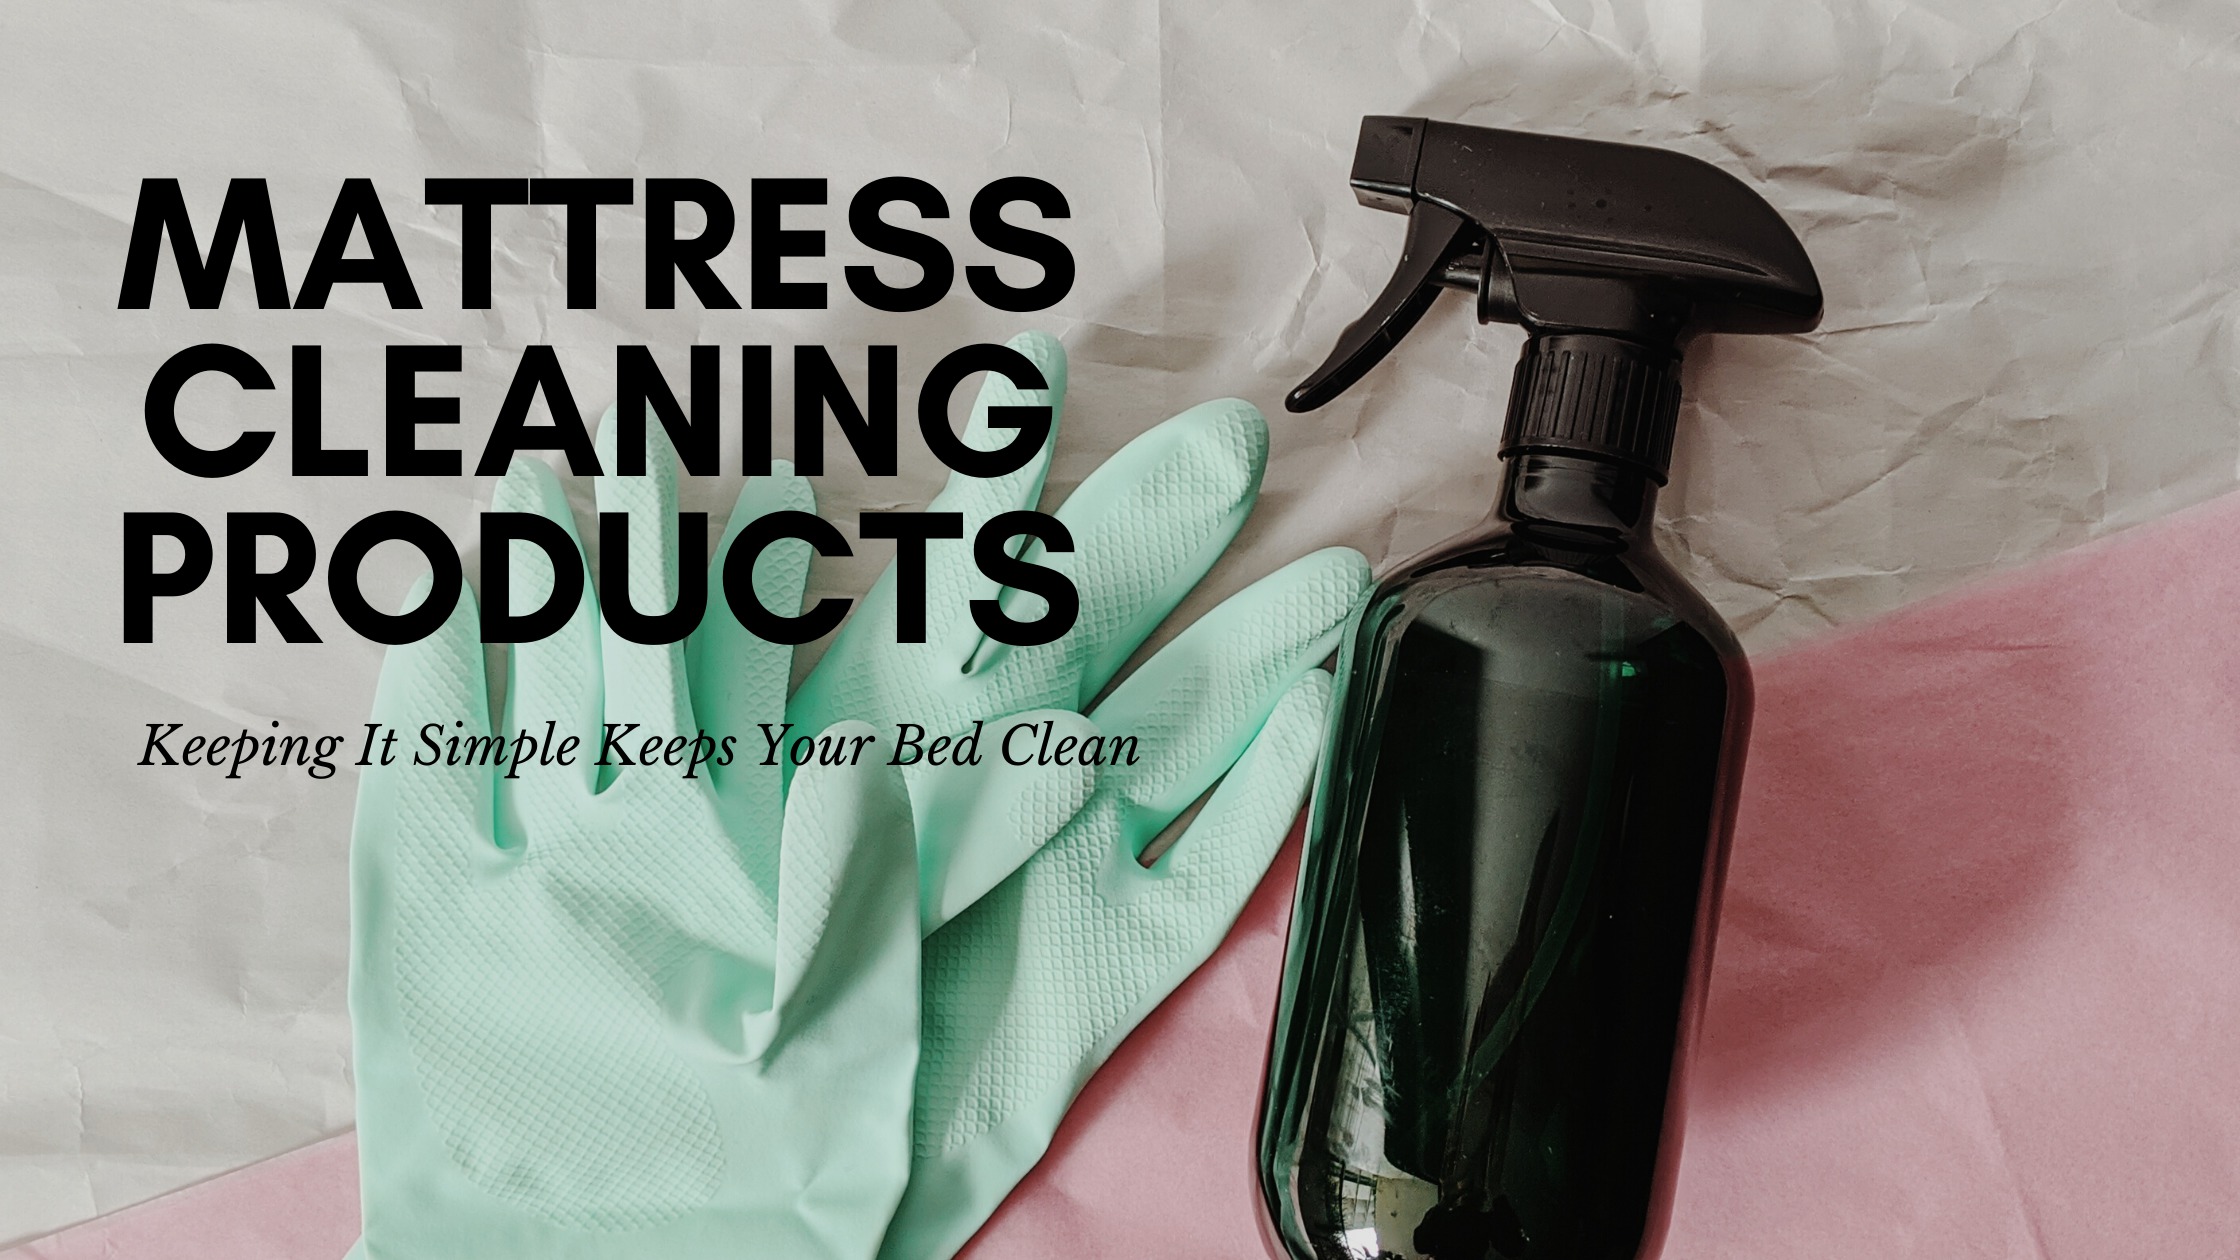 Mattress Cleaning Products